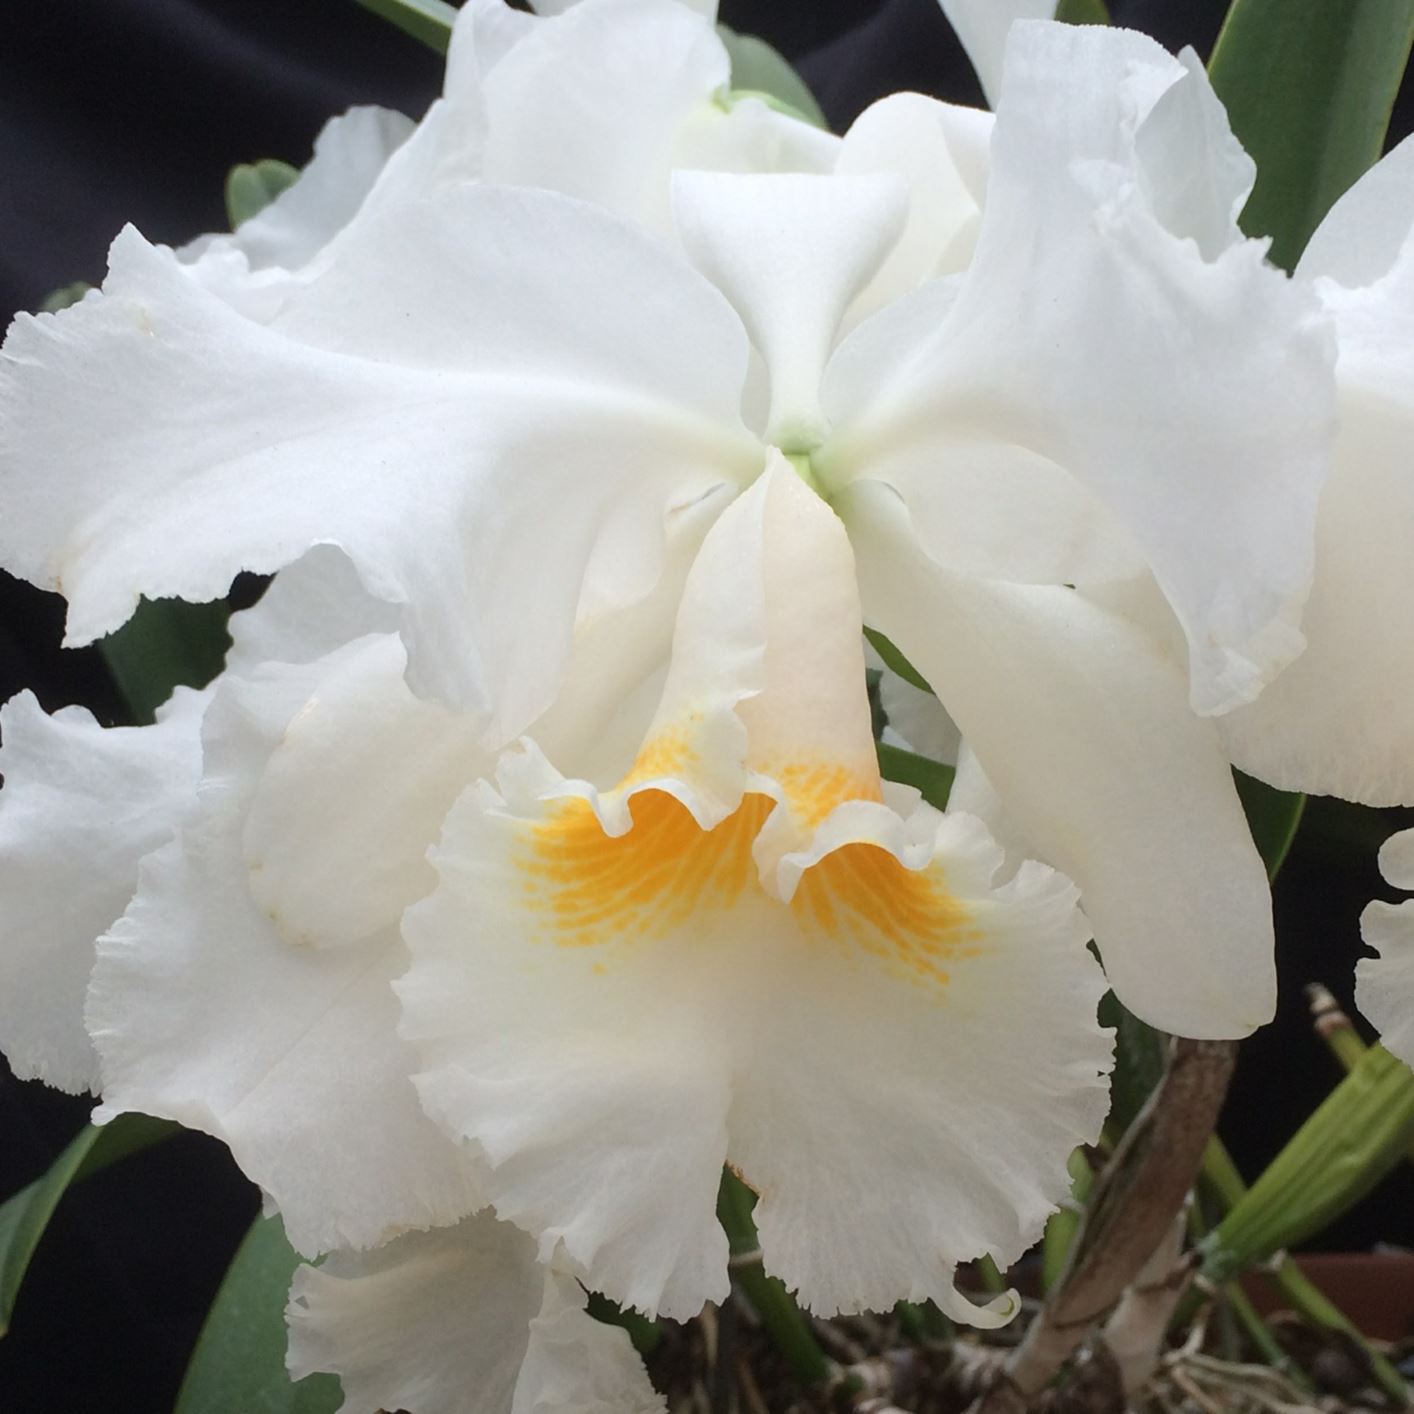 Cattleya Dreadnought - corsage orchid